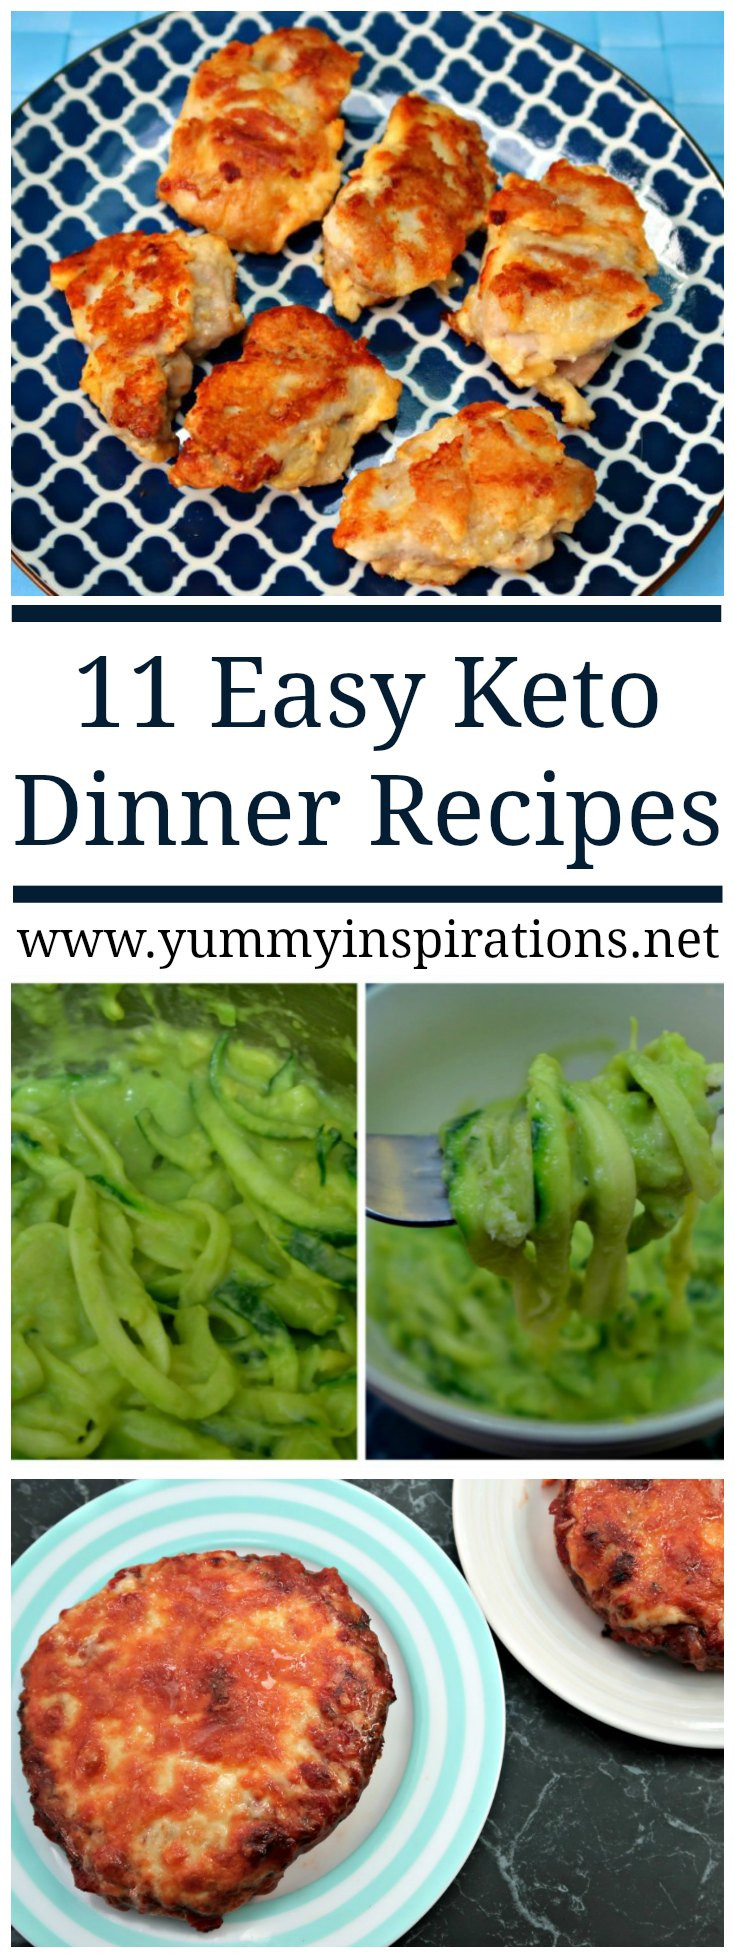 Easy Keto Dinners
 11 Easy Keto Dinner Recipes Quick Low Carb Ketogenic